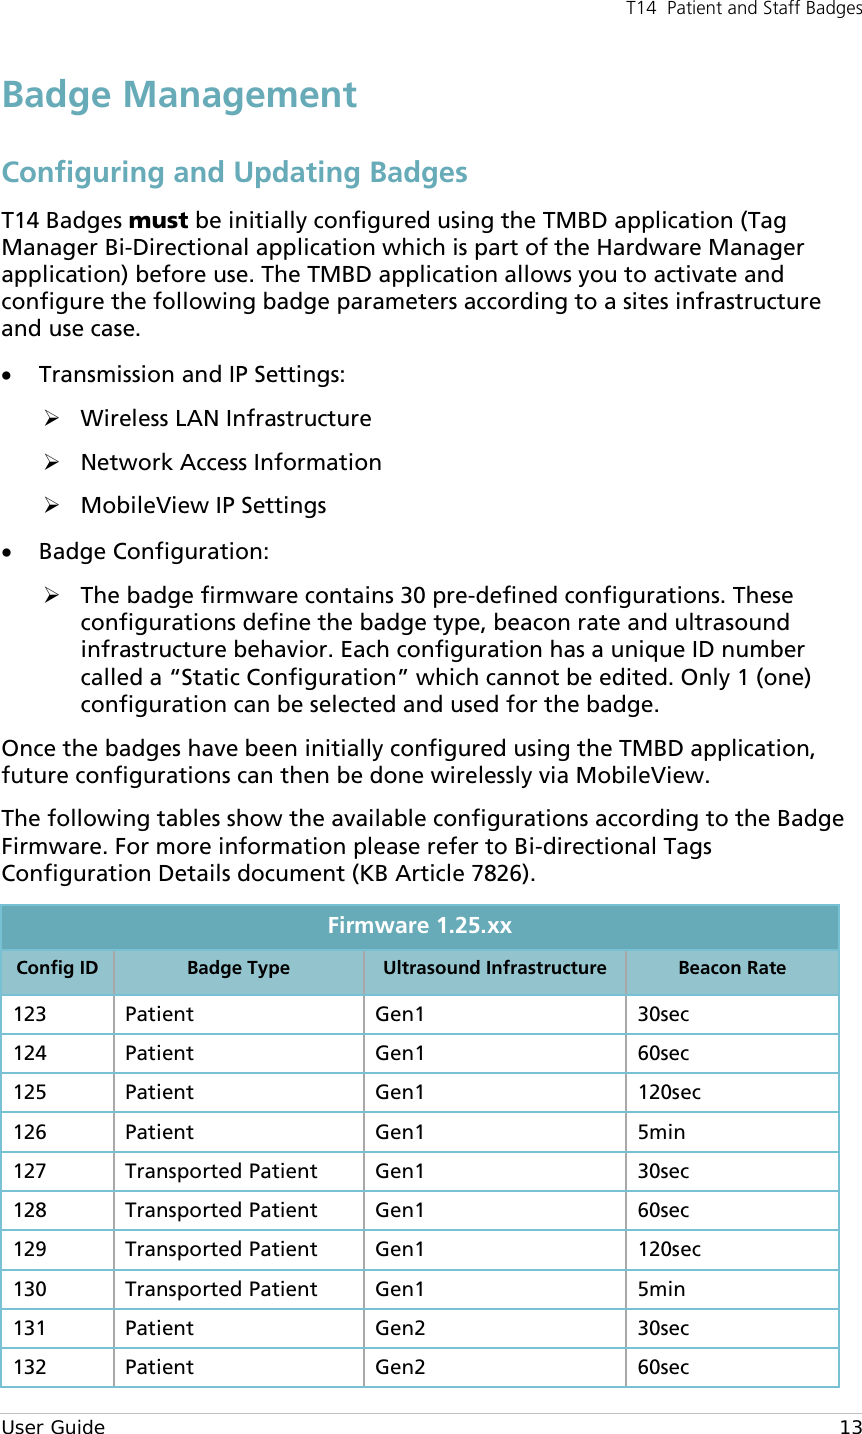 T14  Patient and Staff Badges  User Guide    13 Badge Management Configuring and Updating Badges T14 Badges must be initially configured using the TMBD application (Tag Manager Bi-Directional application which is part of the Hardware Manager application) before use. The TMBD application allows you to activate and configure the following badge parameters according to a sites infrastructure and use case. • Transmission and IP Settings:  Wireless LAN Infrastructure  Network Access Information  MobileView IP Settings • Badge Configuration:  The badge firmware contains 30 pre-defined configurations. These configurations define the badge type, beacon rate and ultrasound infrastructure behavior. Each configuration has a unique ID number called a “Static Configuration” which cannot be edited. Only 1 (one) configuration can be selected and used for the badge. Once the badges have been initially configured using the TMBD application, future configurations can then be done wirelessly via MobileView. The following tables show the available configurations according to the Badge Firmware. For more information please refer to Bi-directional Tags Configuration Details document (KB Article 7826). Firmware 1.25.xx Config ID Badge Type Ultrasound Infrastructure Beacon Rate 123 Patient Gen1 30sec 124 Patient  Gen1 60sec 125 Patient Gen1 120sec 126 Patient Gen1 5min 127 Transported Patient Gen1 30sec 128 Transported Patient Gen1 60sec 129 Transported Patient Gen1  120sec 130 Transported Patient Gen1 5min 131 Patient Gen2  30sec 132 Patient Gen2  60sec 